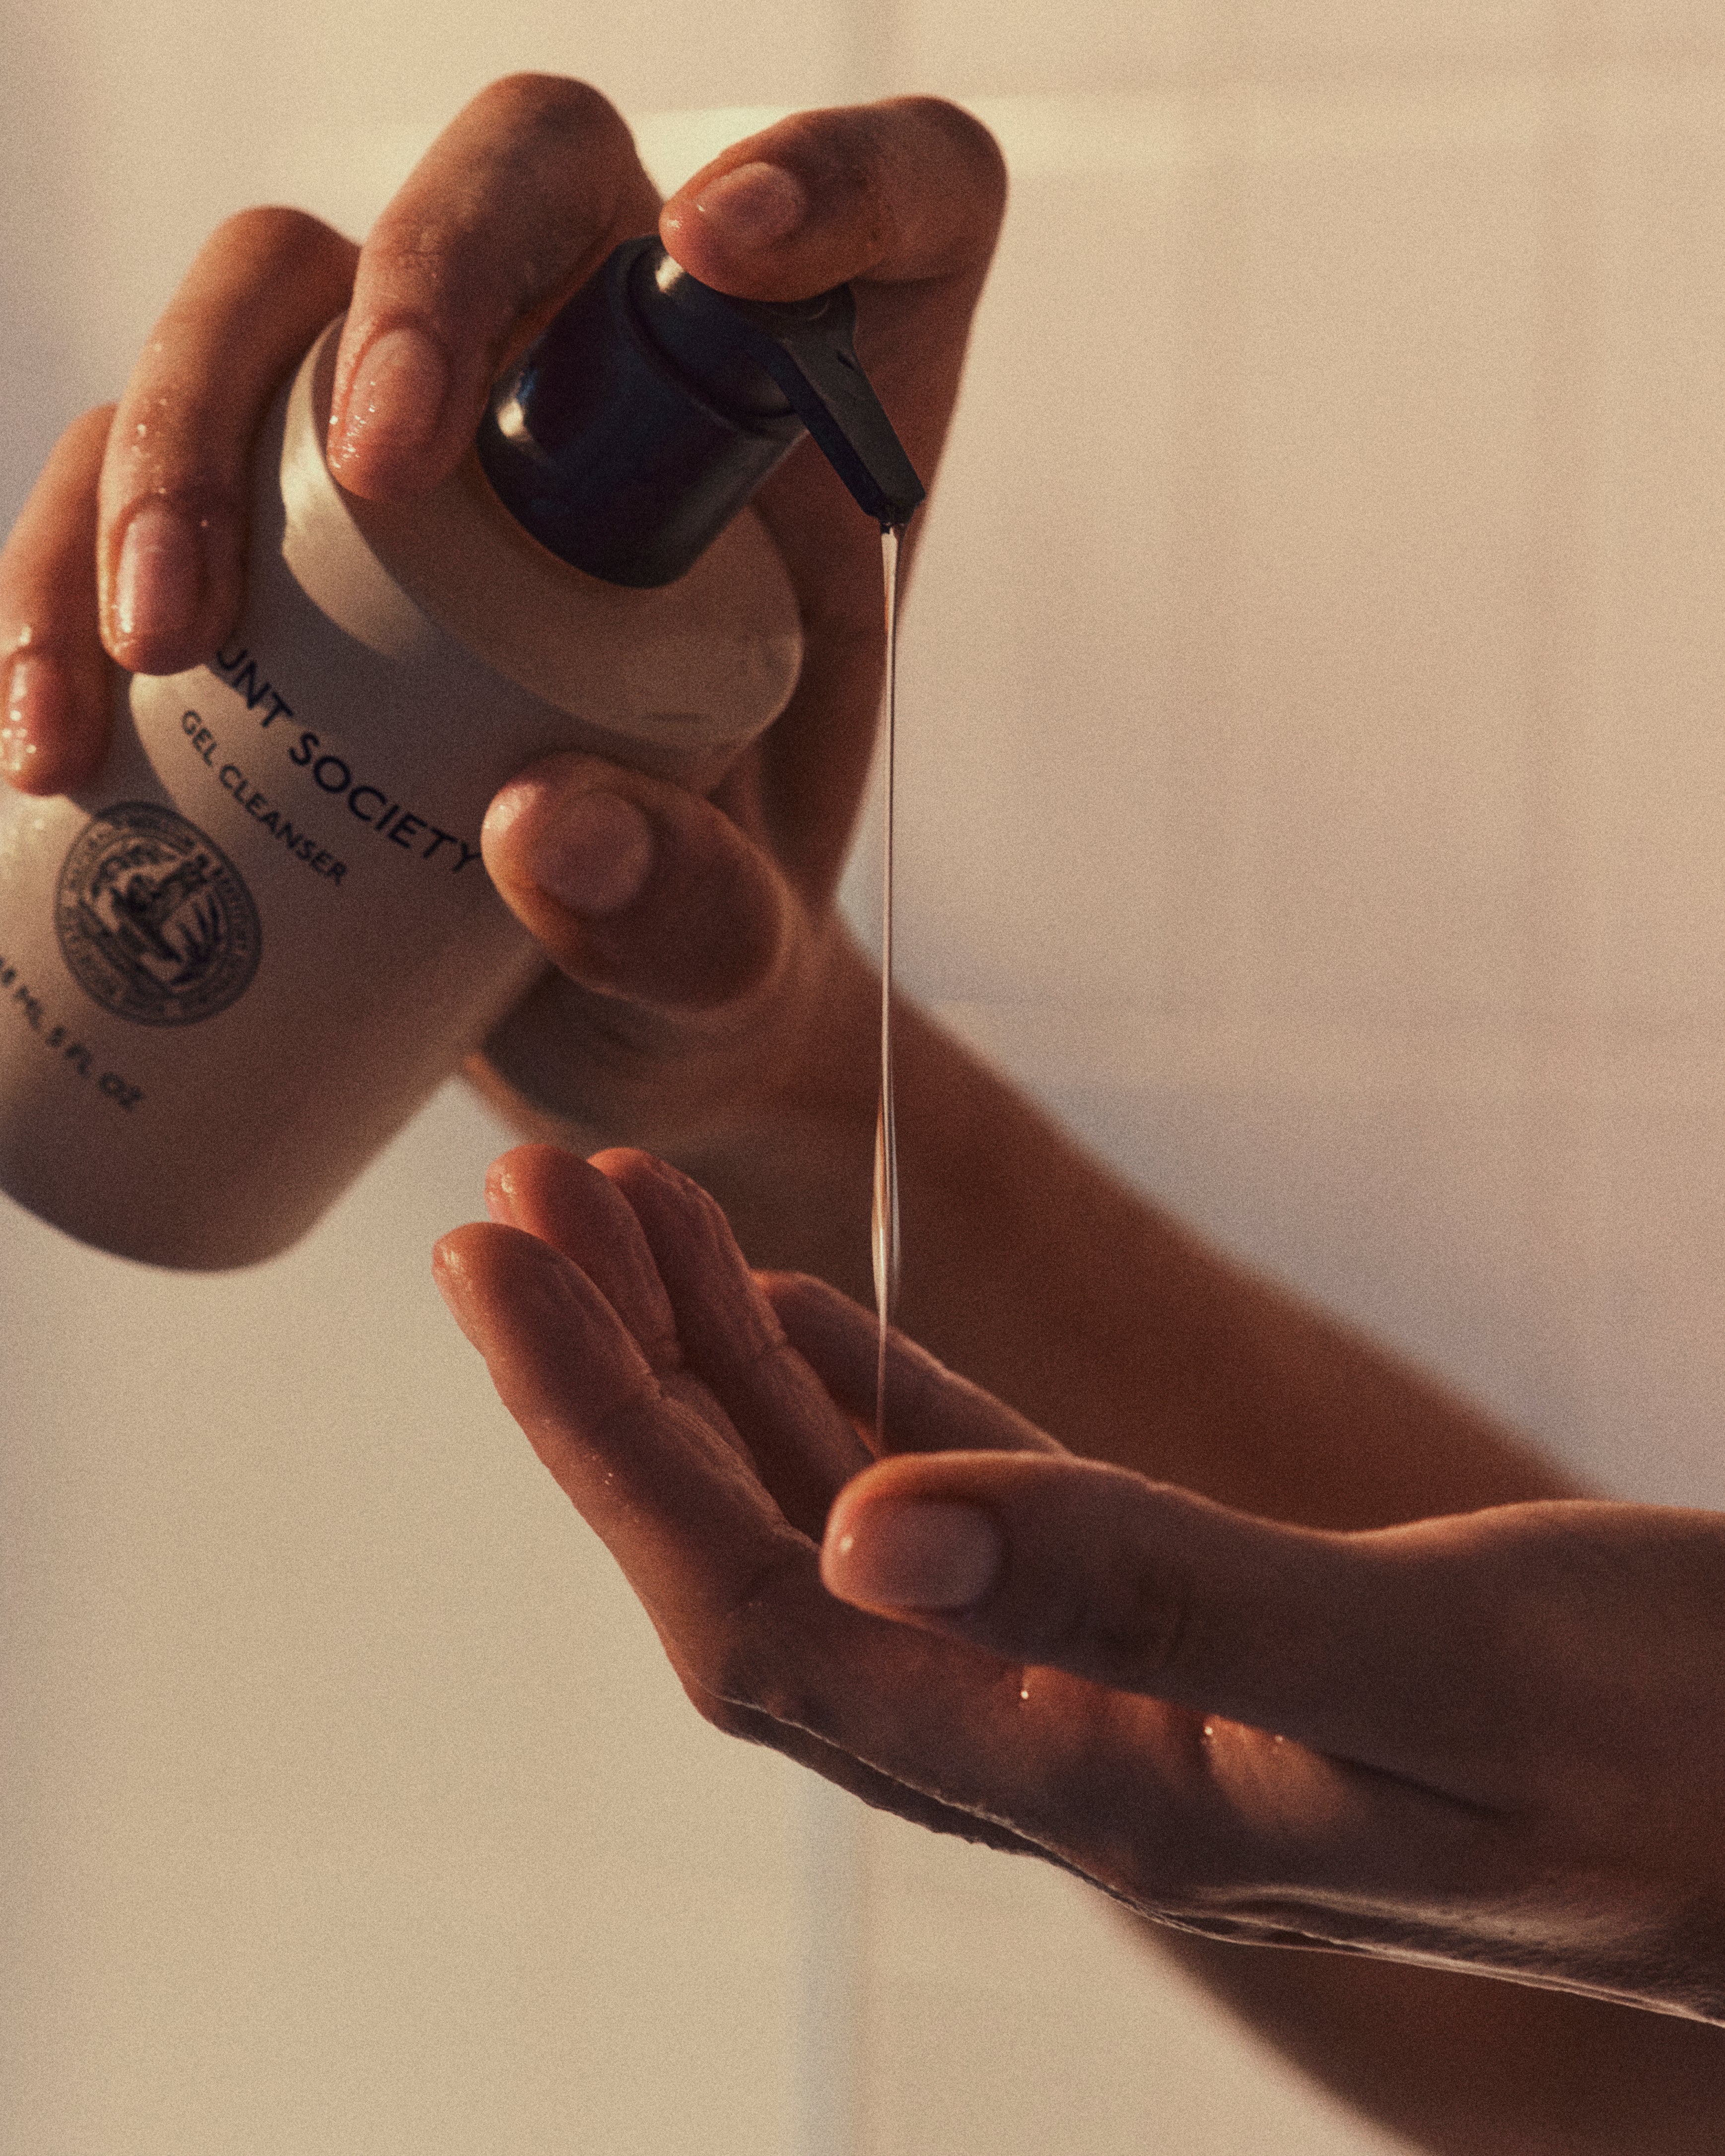 Close-up of hands dispensing Cozy Earth's Gel Cleanser from a pump bottle. One hand is holding the bottle and pressing the pump, while the other hand is positioned below to catch the gel. The background is softly lit with warm tones.